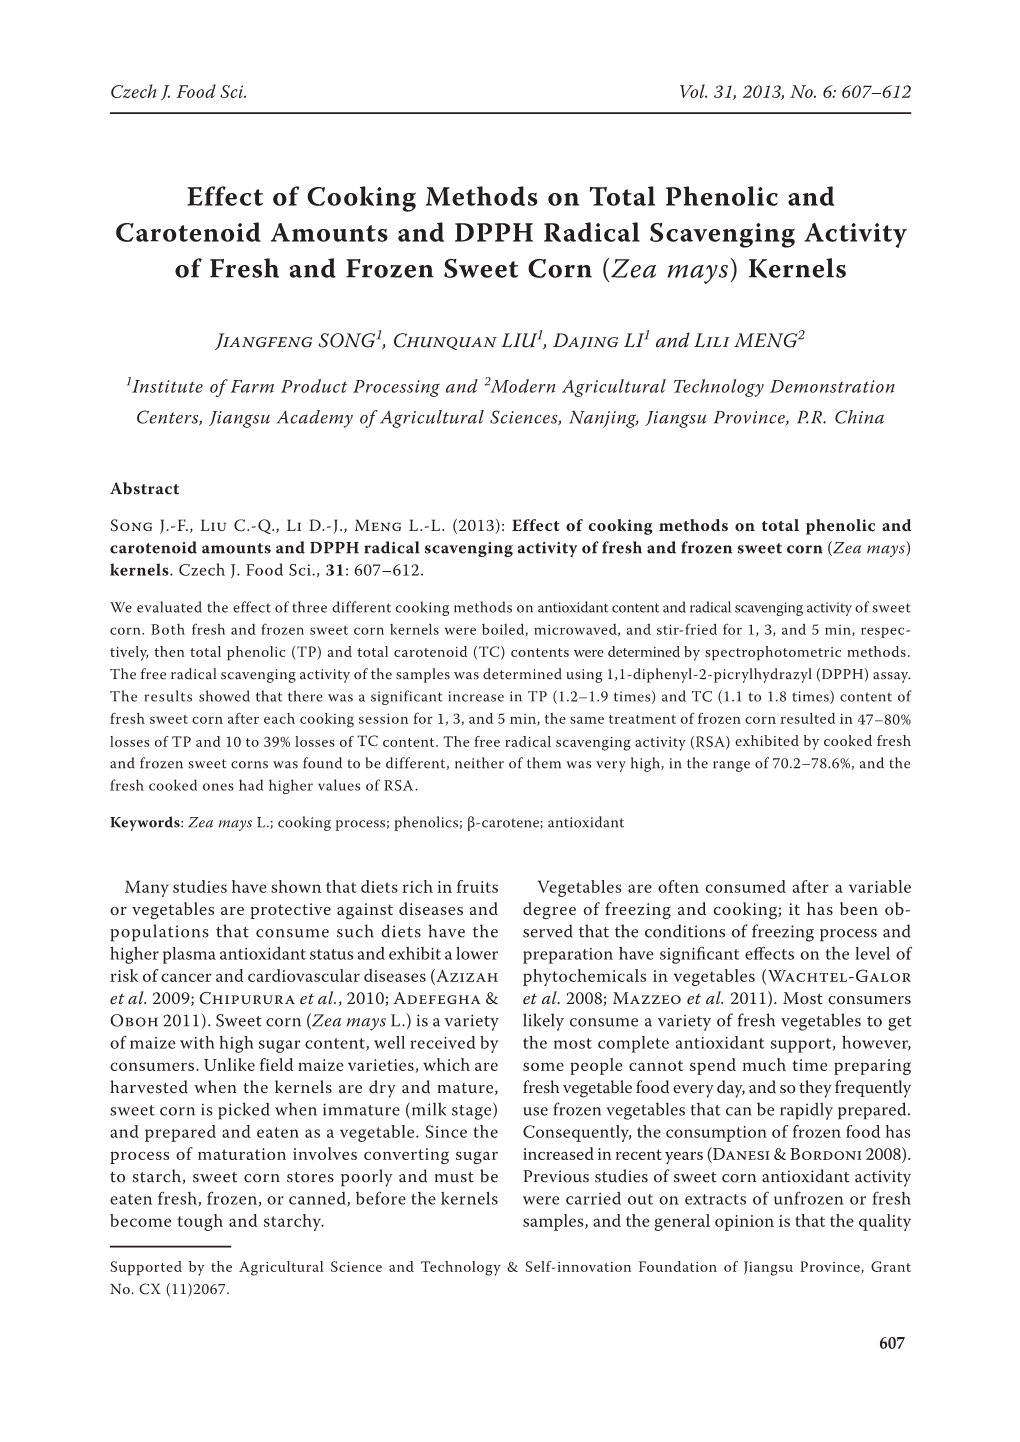 Effect of Cooking Methods on Total Phenolic and Carotenoid Amounts and DPPH Radical Scavenging Activity of Fresh and Frozen Sweet Corn (Zea Mays) Kernels